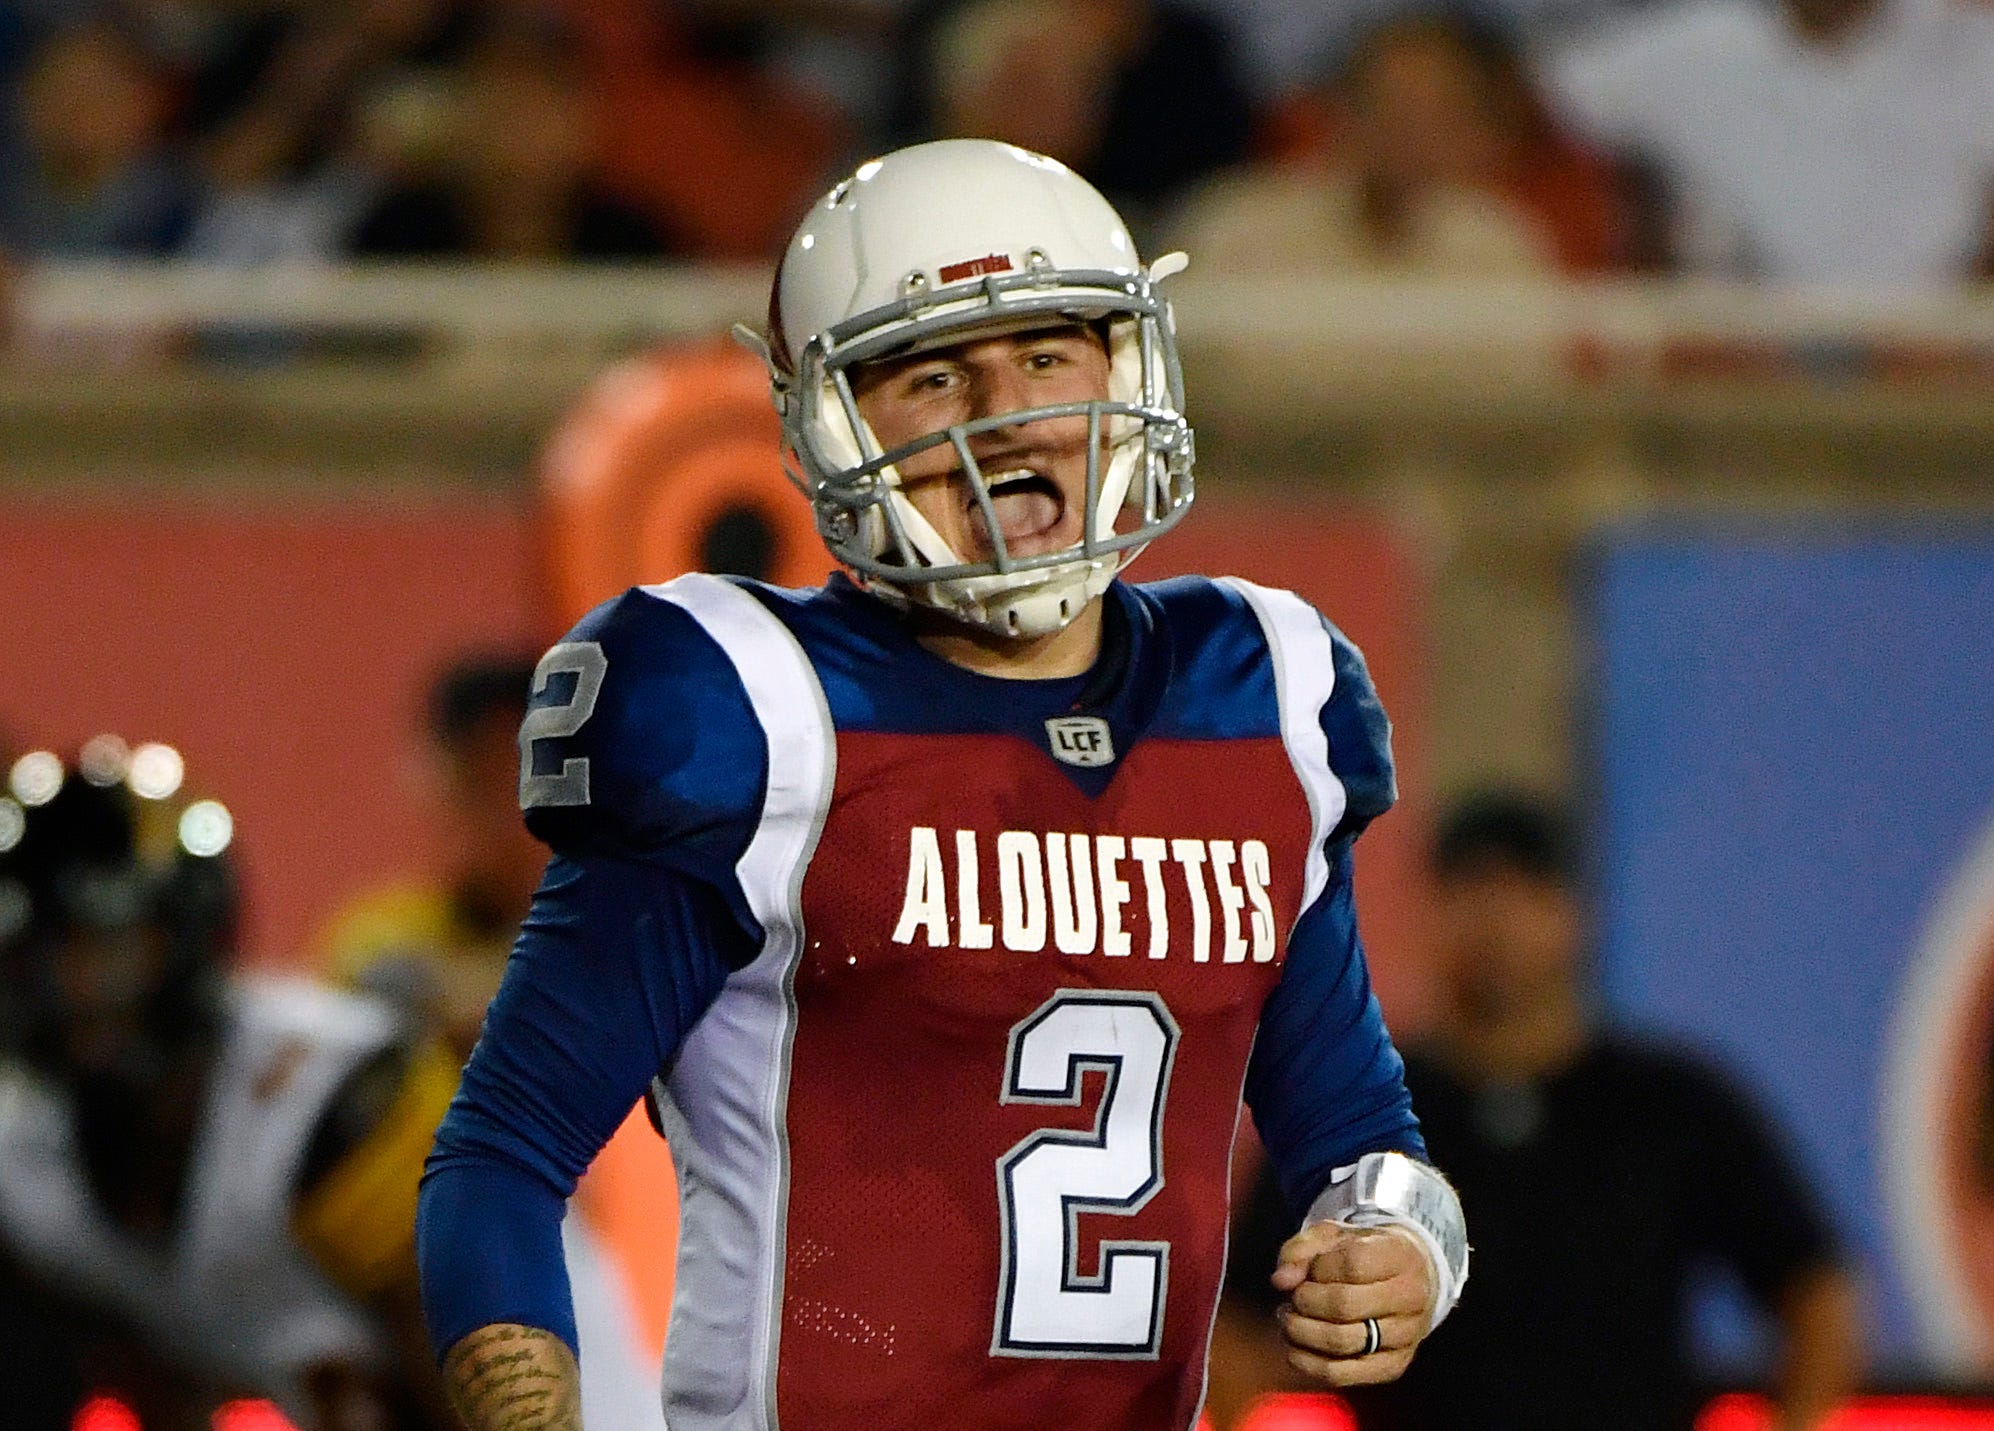 Report: Johnny Manziel tweets about interest in the XFL, then deletes his account